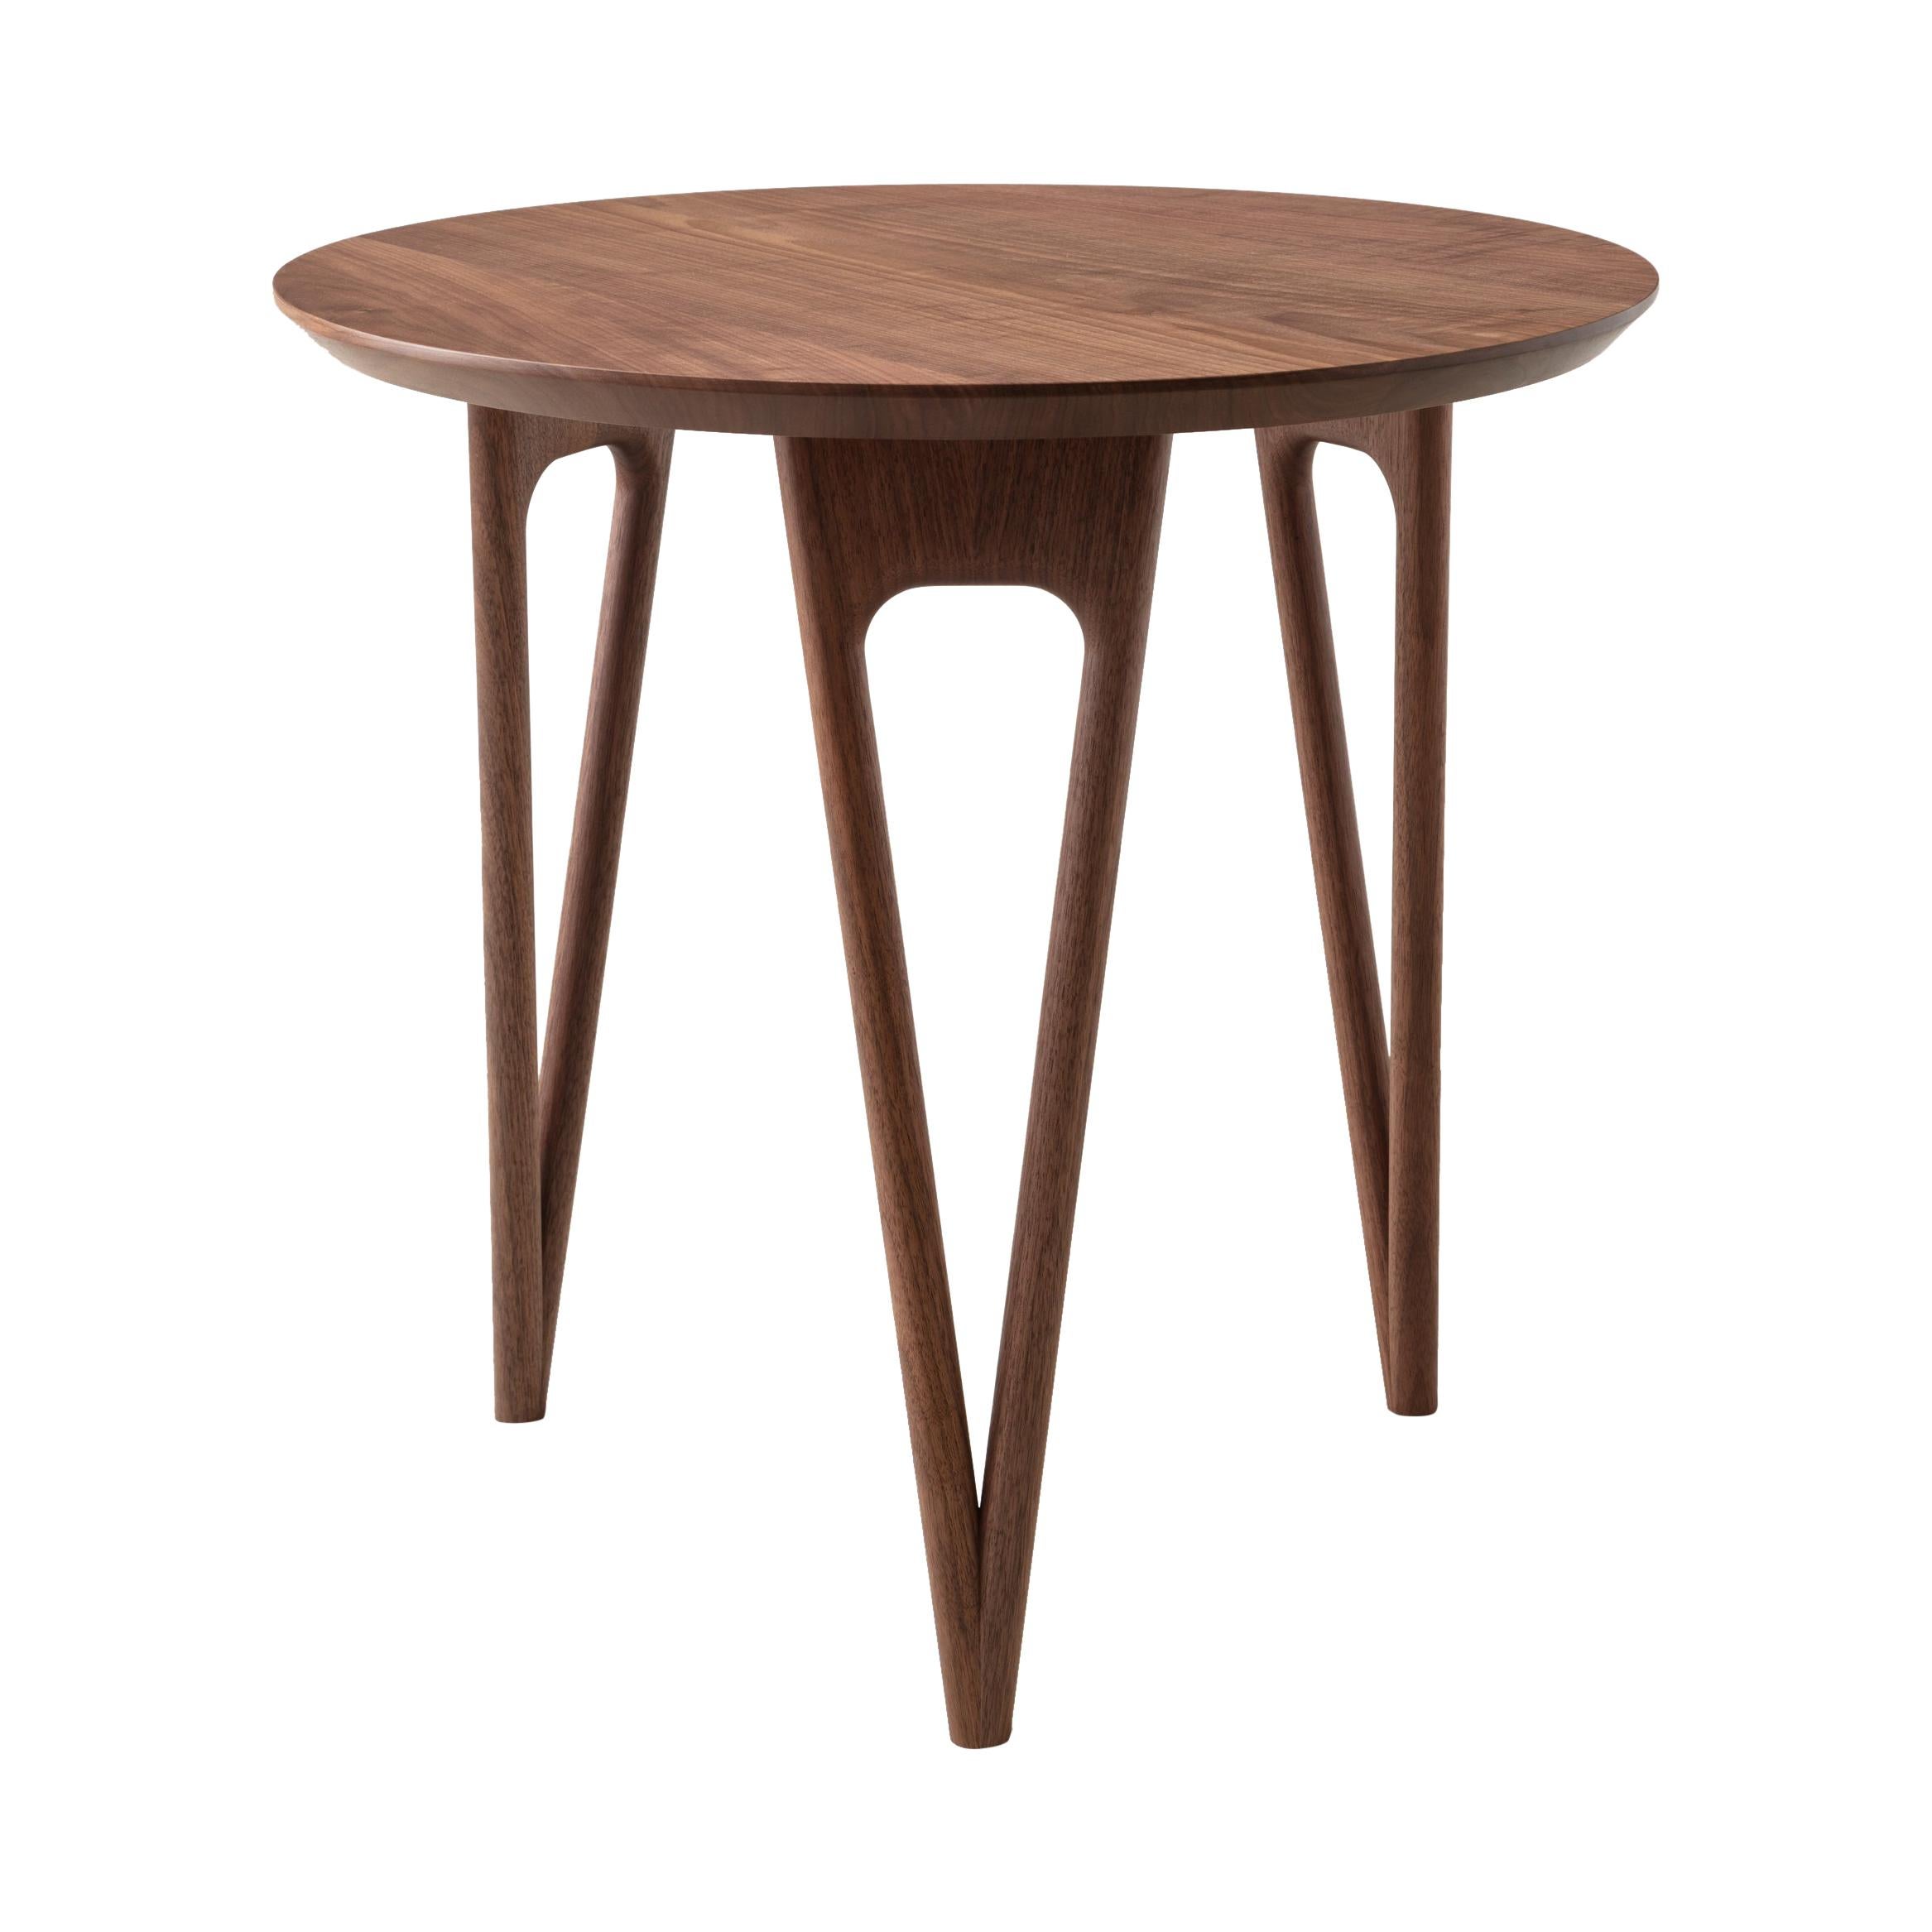 Hair Pin Side Table Shown in Black Walnut 24D x 24H, Made in USA